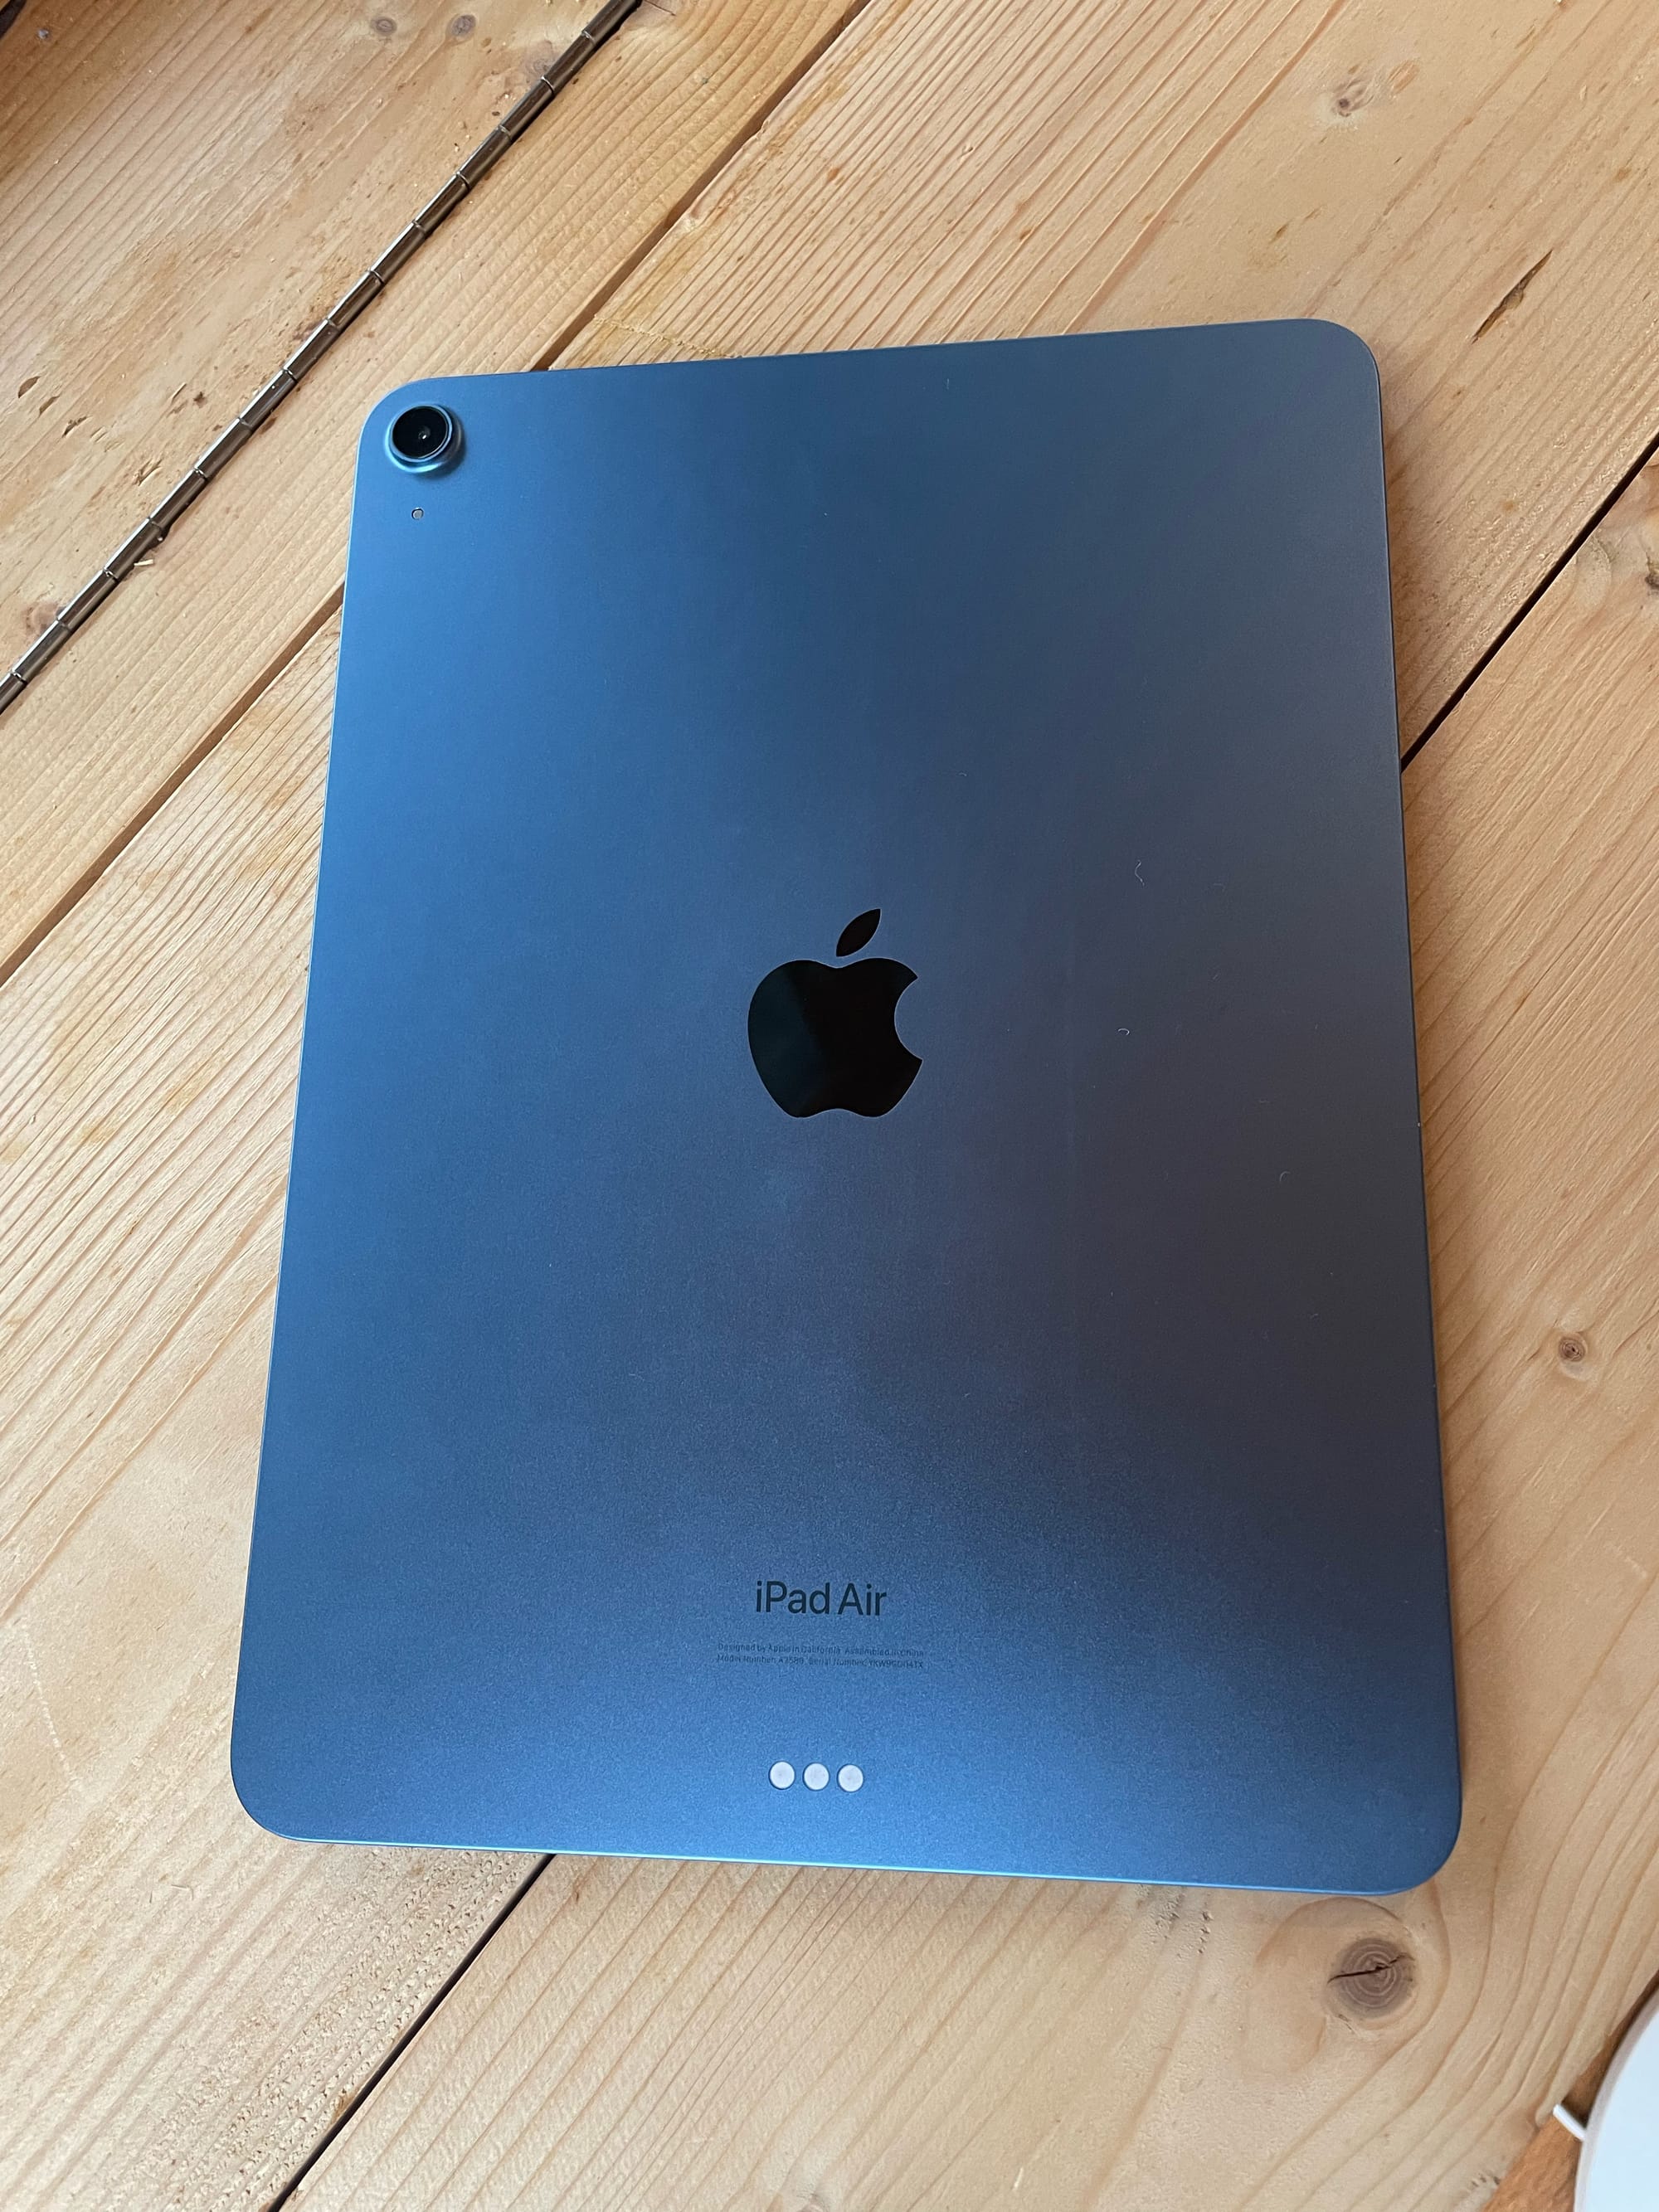 The case for iPad